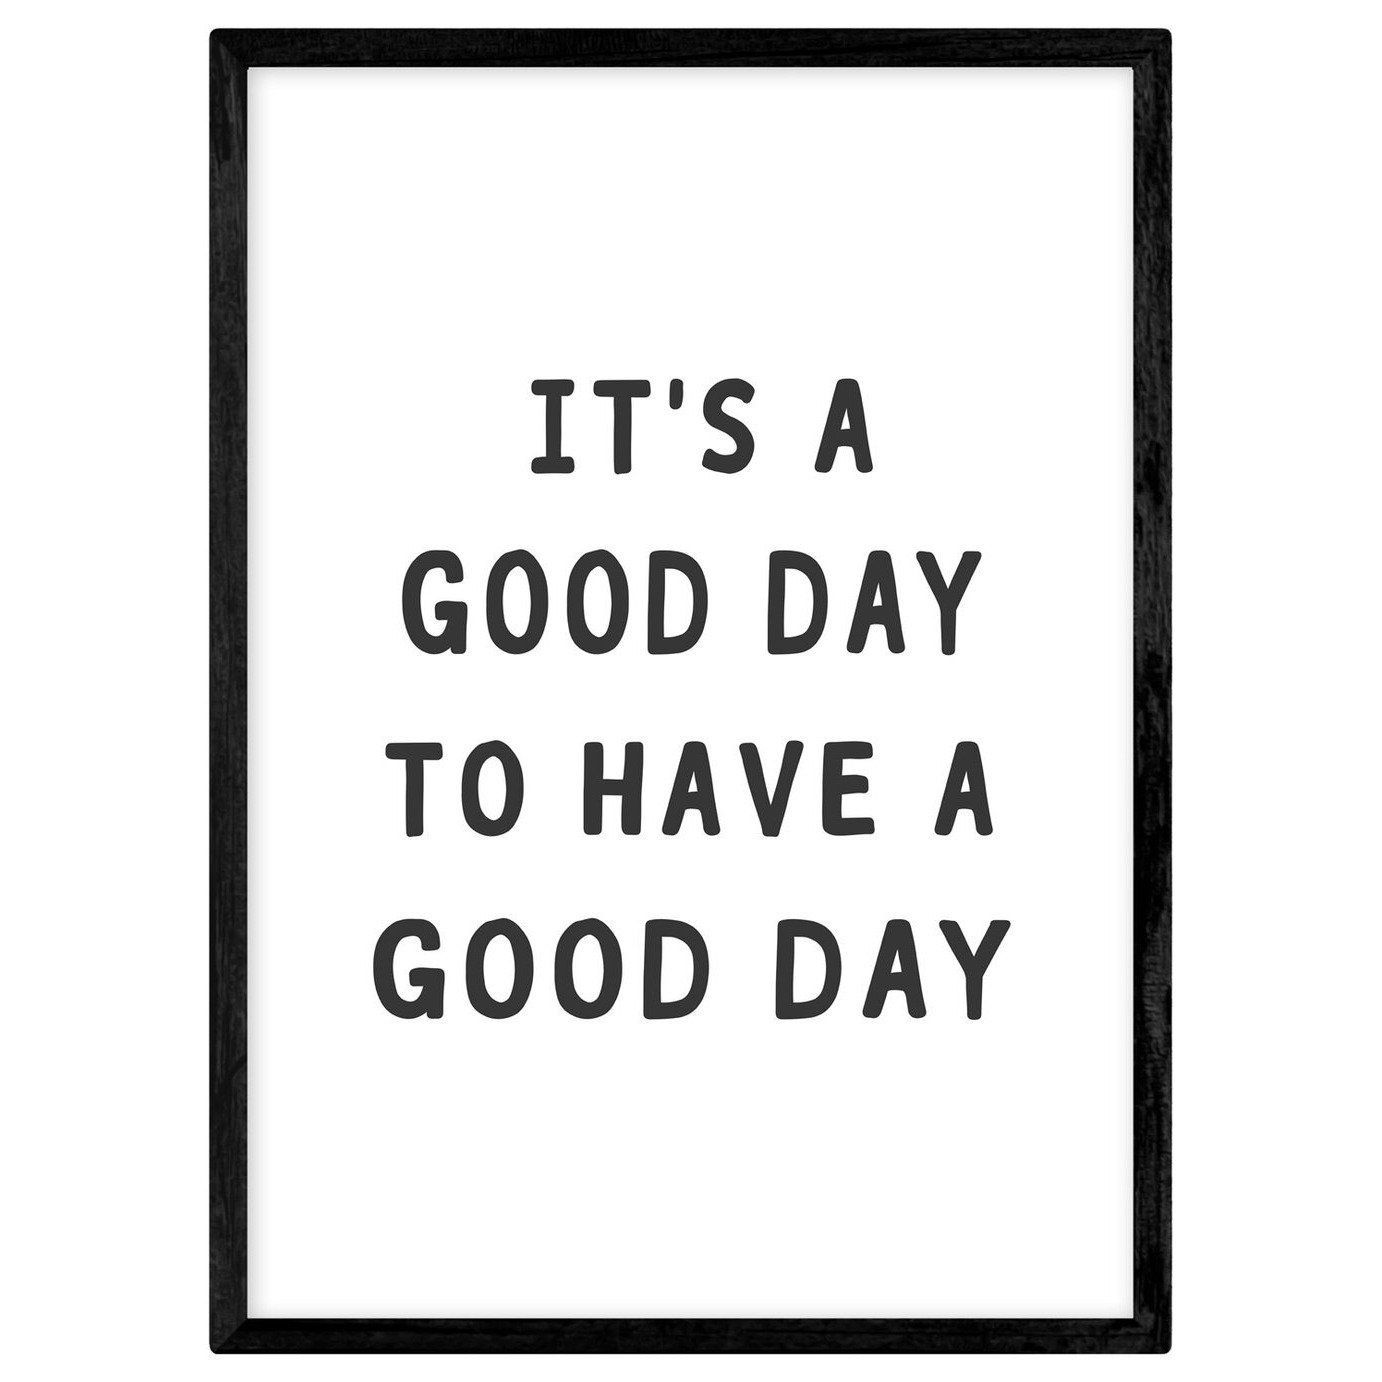 East End Prints Good Day Typographic Framed Wall Print - A2 - image 1